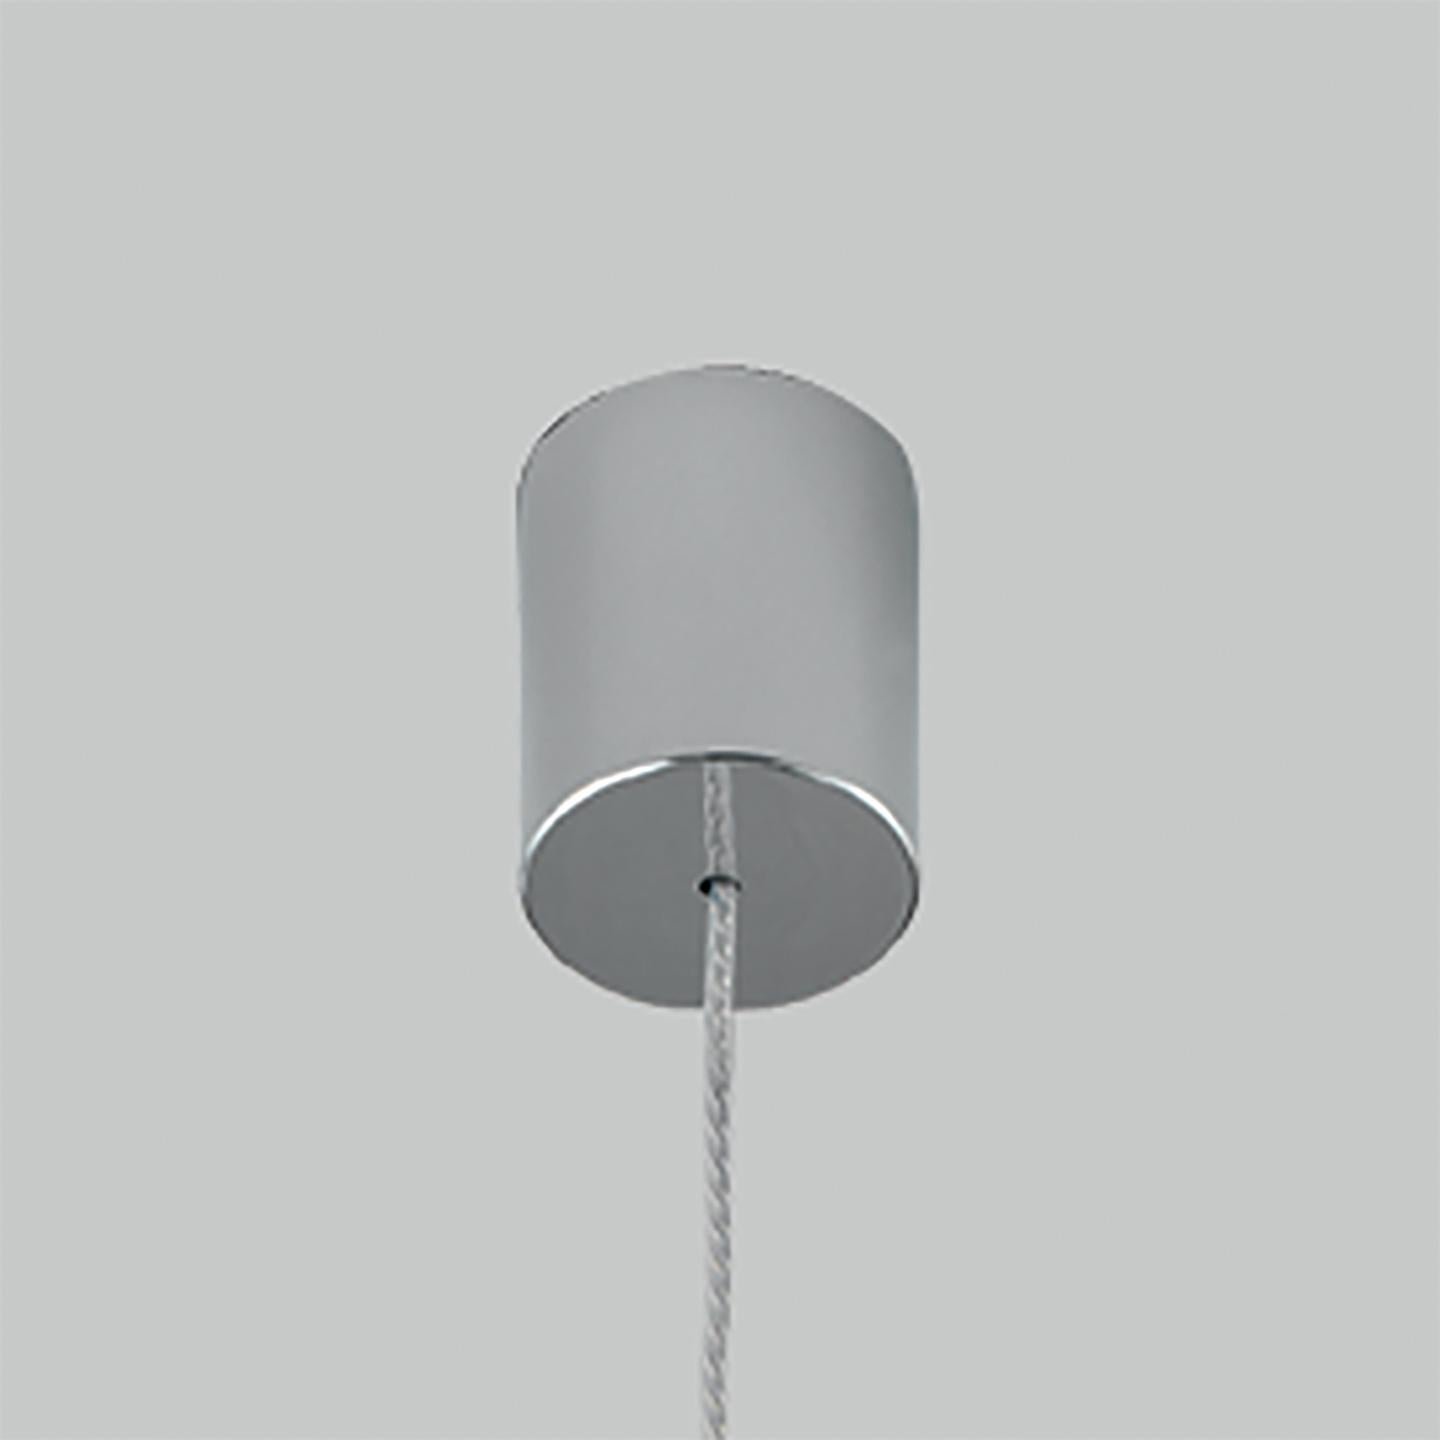 Italian Leucos Kuk S G9 Pendant Light in Transparent & Chrome by Paolo Crepax  For Sale